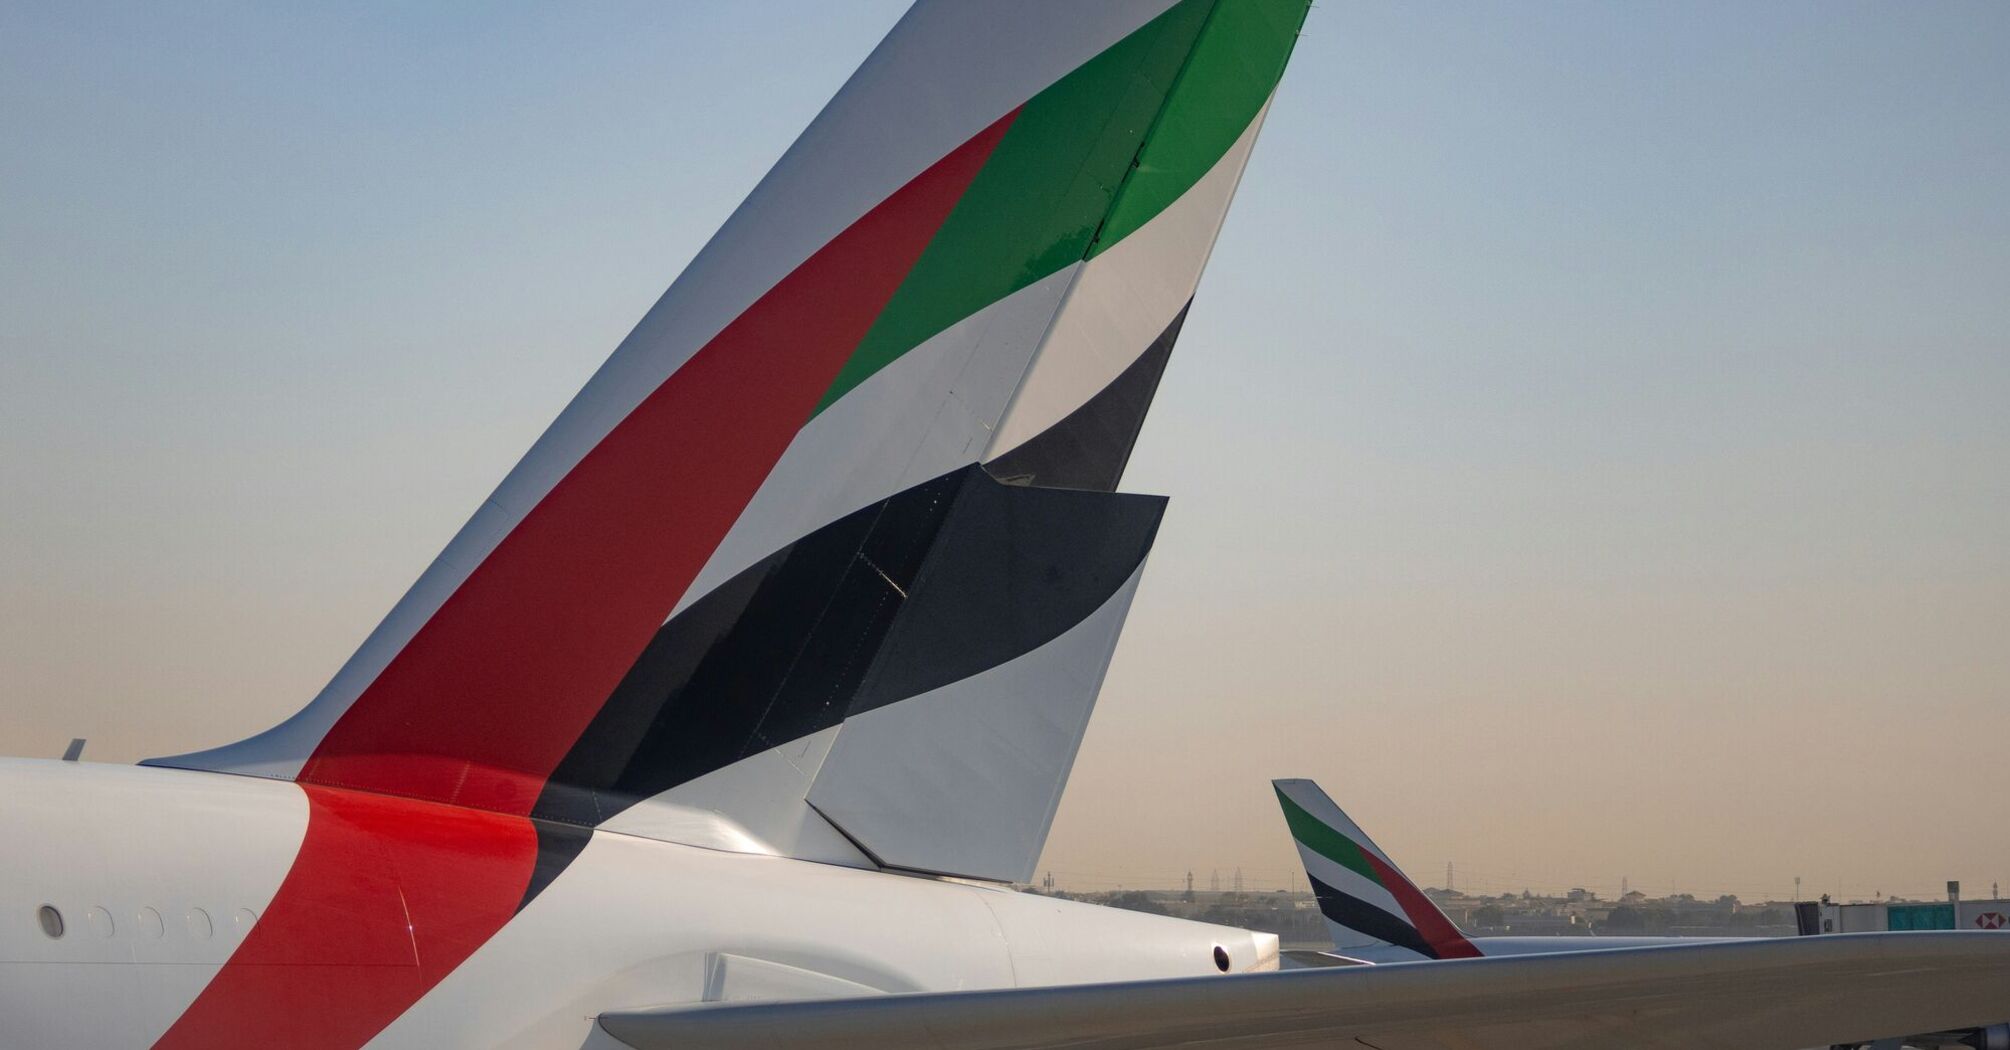 Close-up view of the tail fins of multiple airplanes showing the Emirates logo on a clear day at the airport